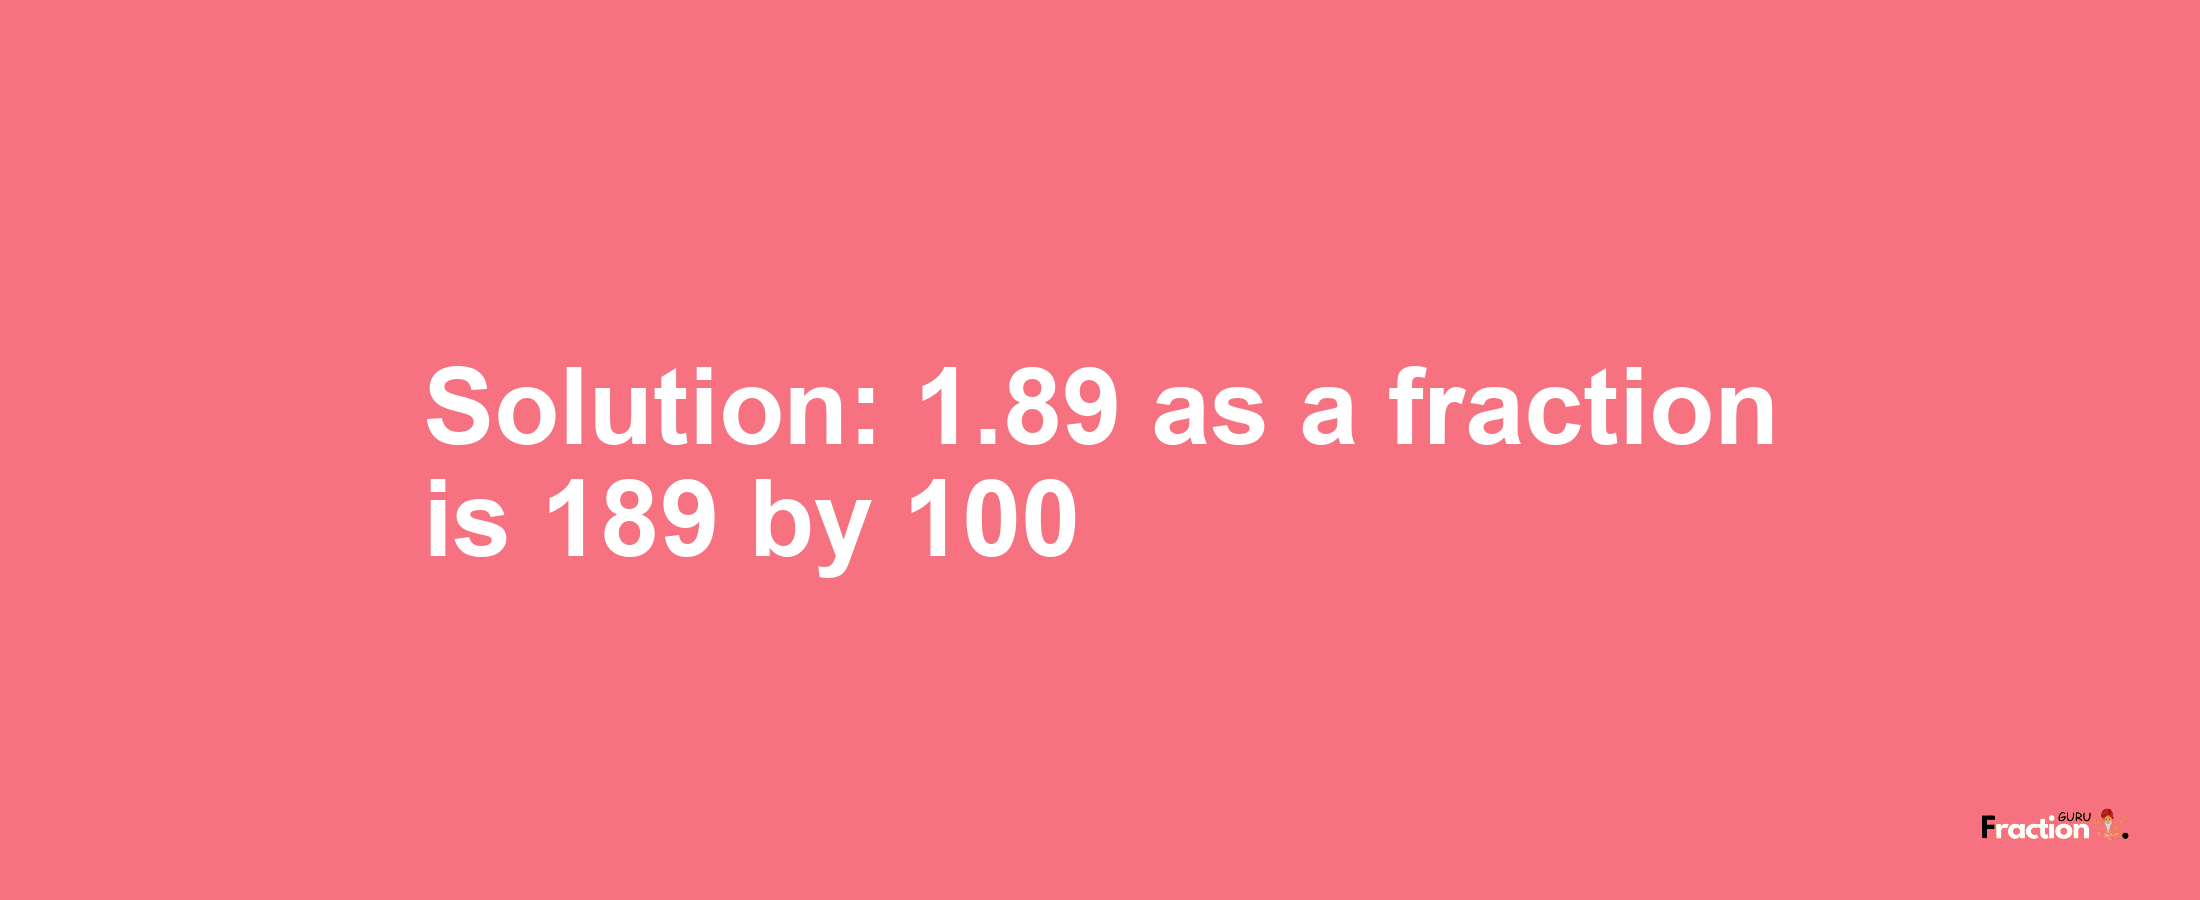 Solution:1.89 as a fraction is 189/100